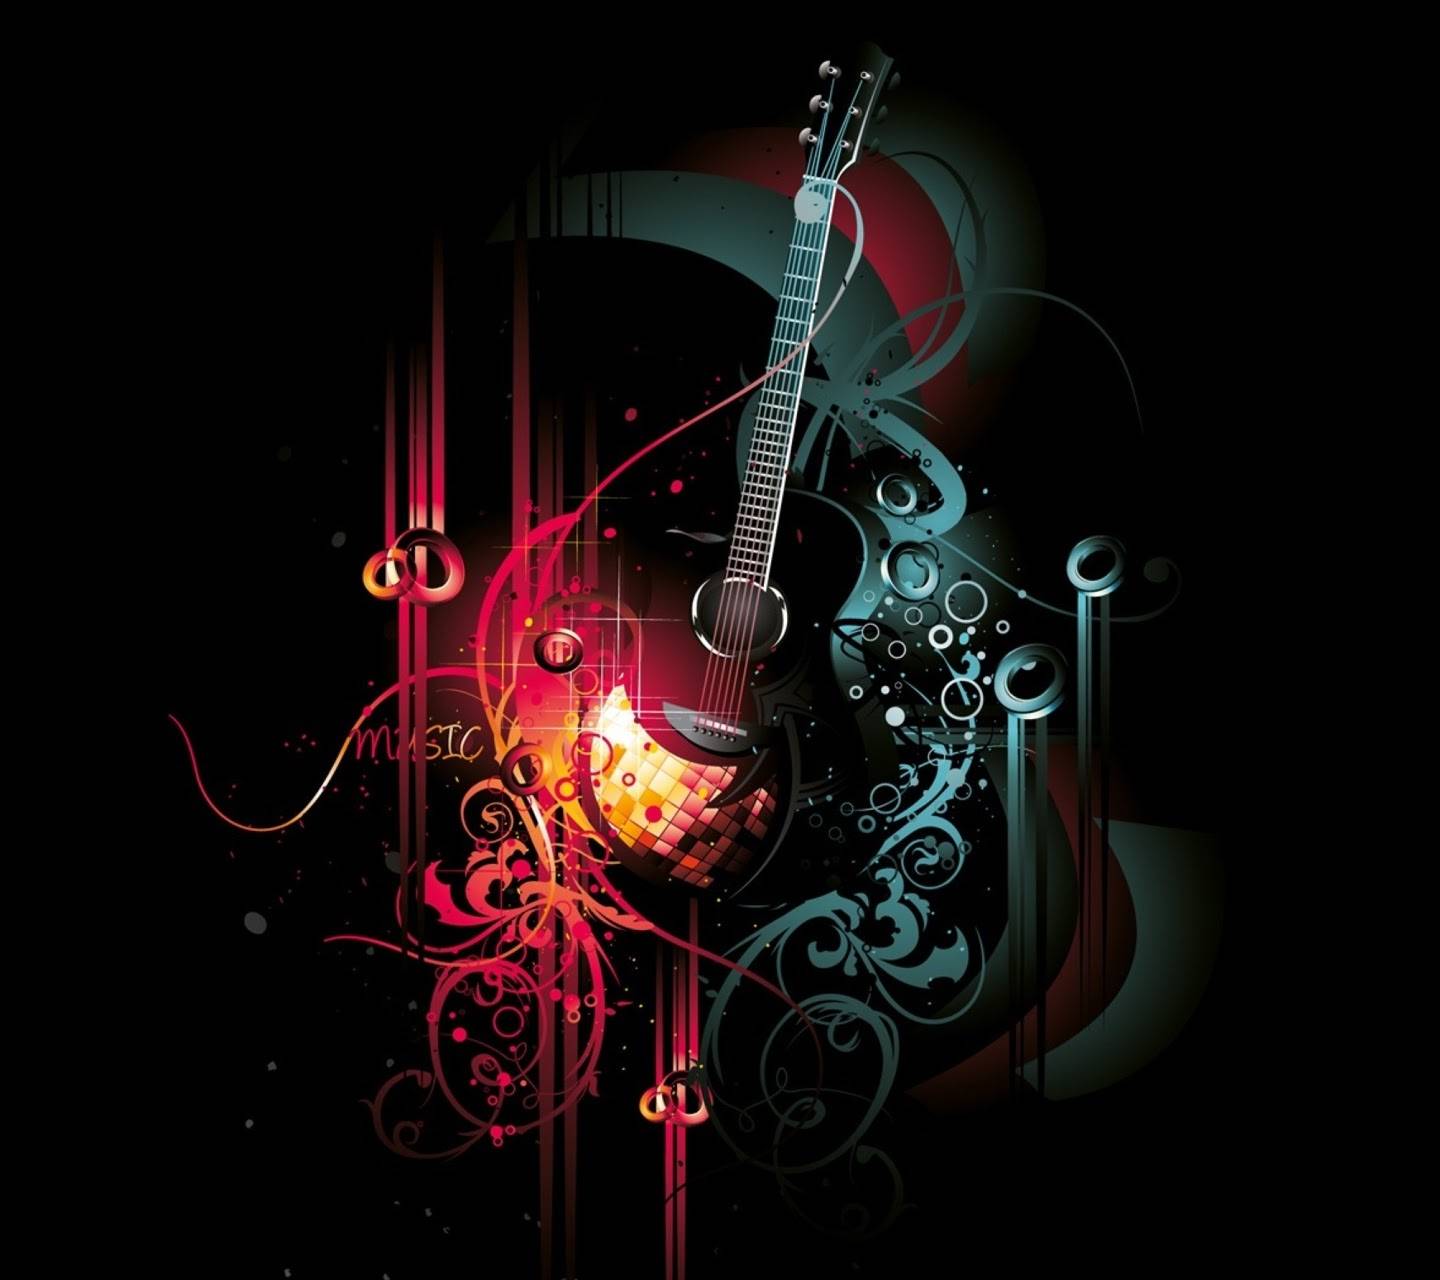 n2 wallpaper,guitar,string instrument,electric guitar,plucked string instruments,graphic design